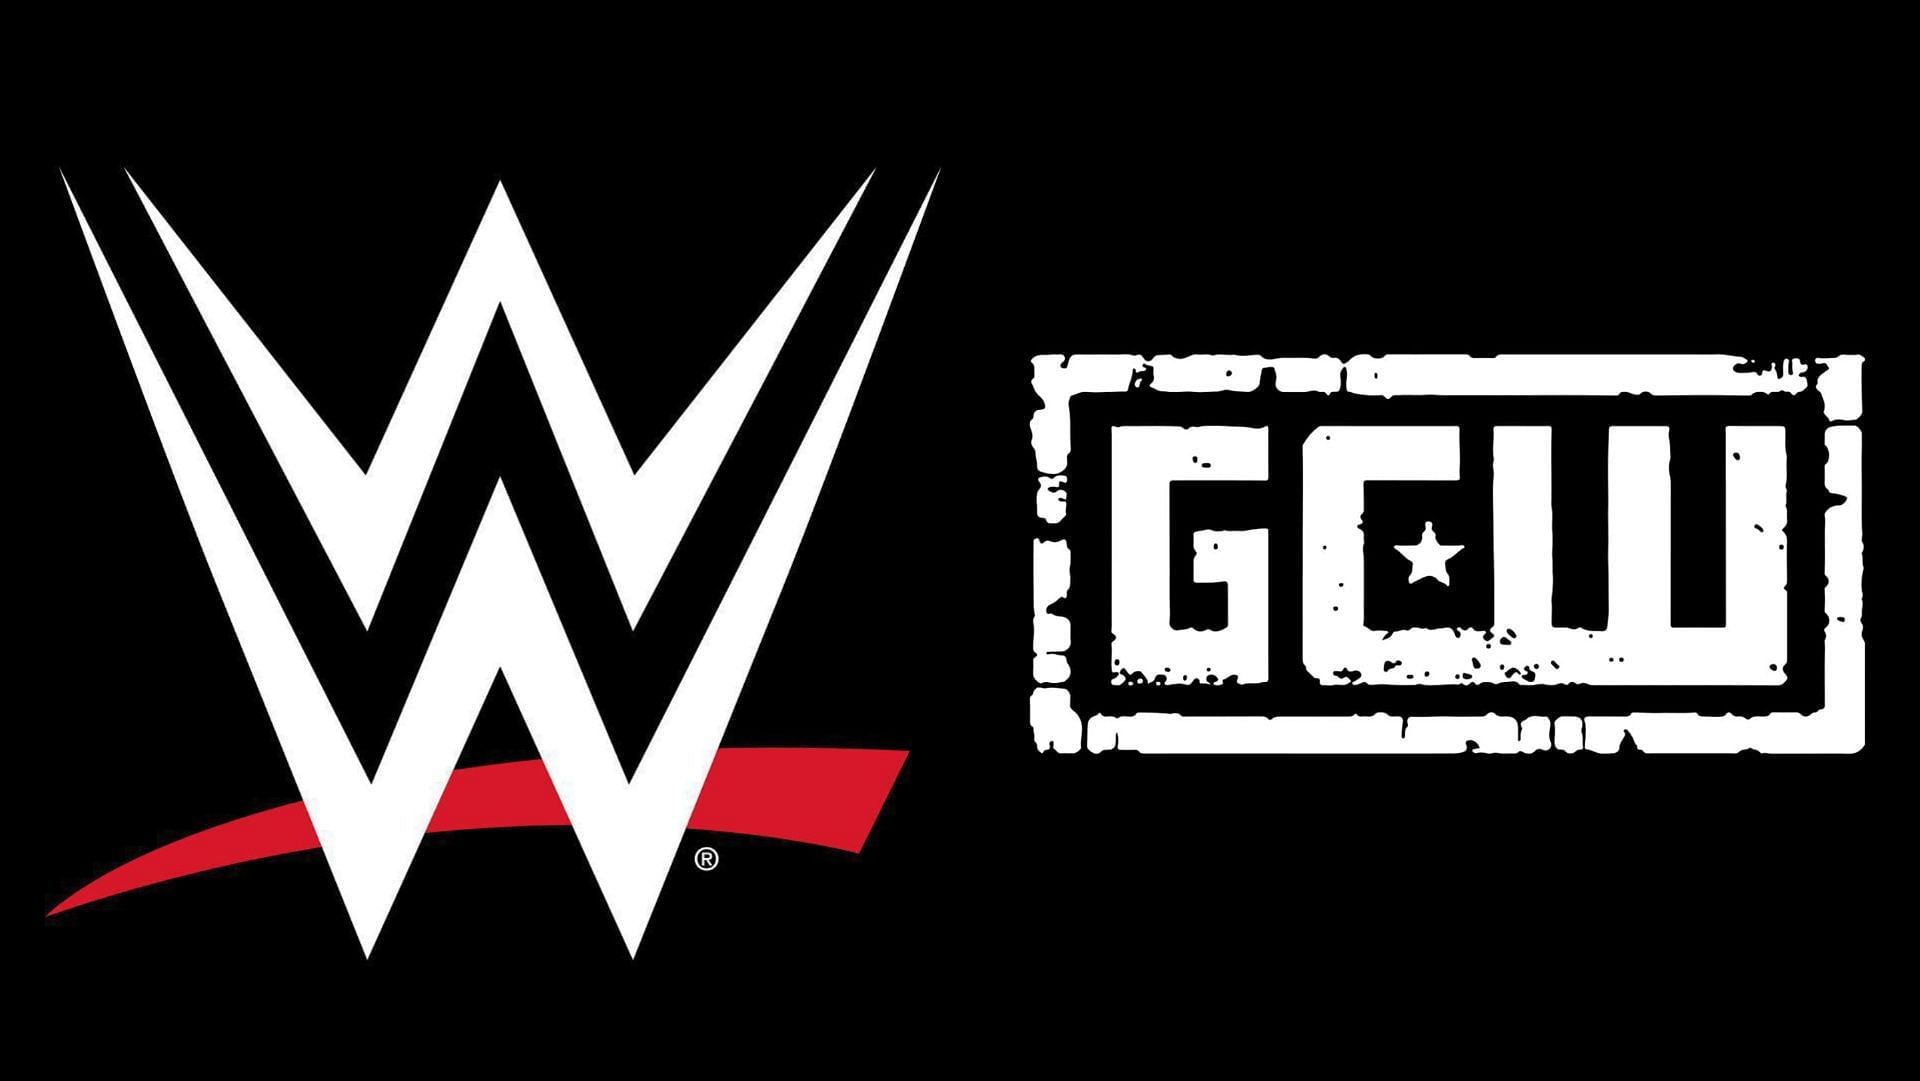 The official logos for WWE and GCW